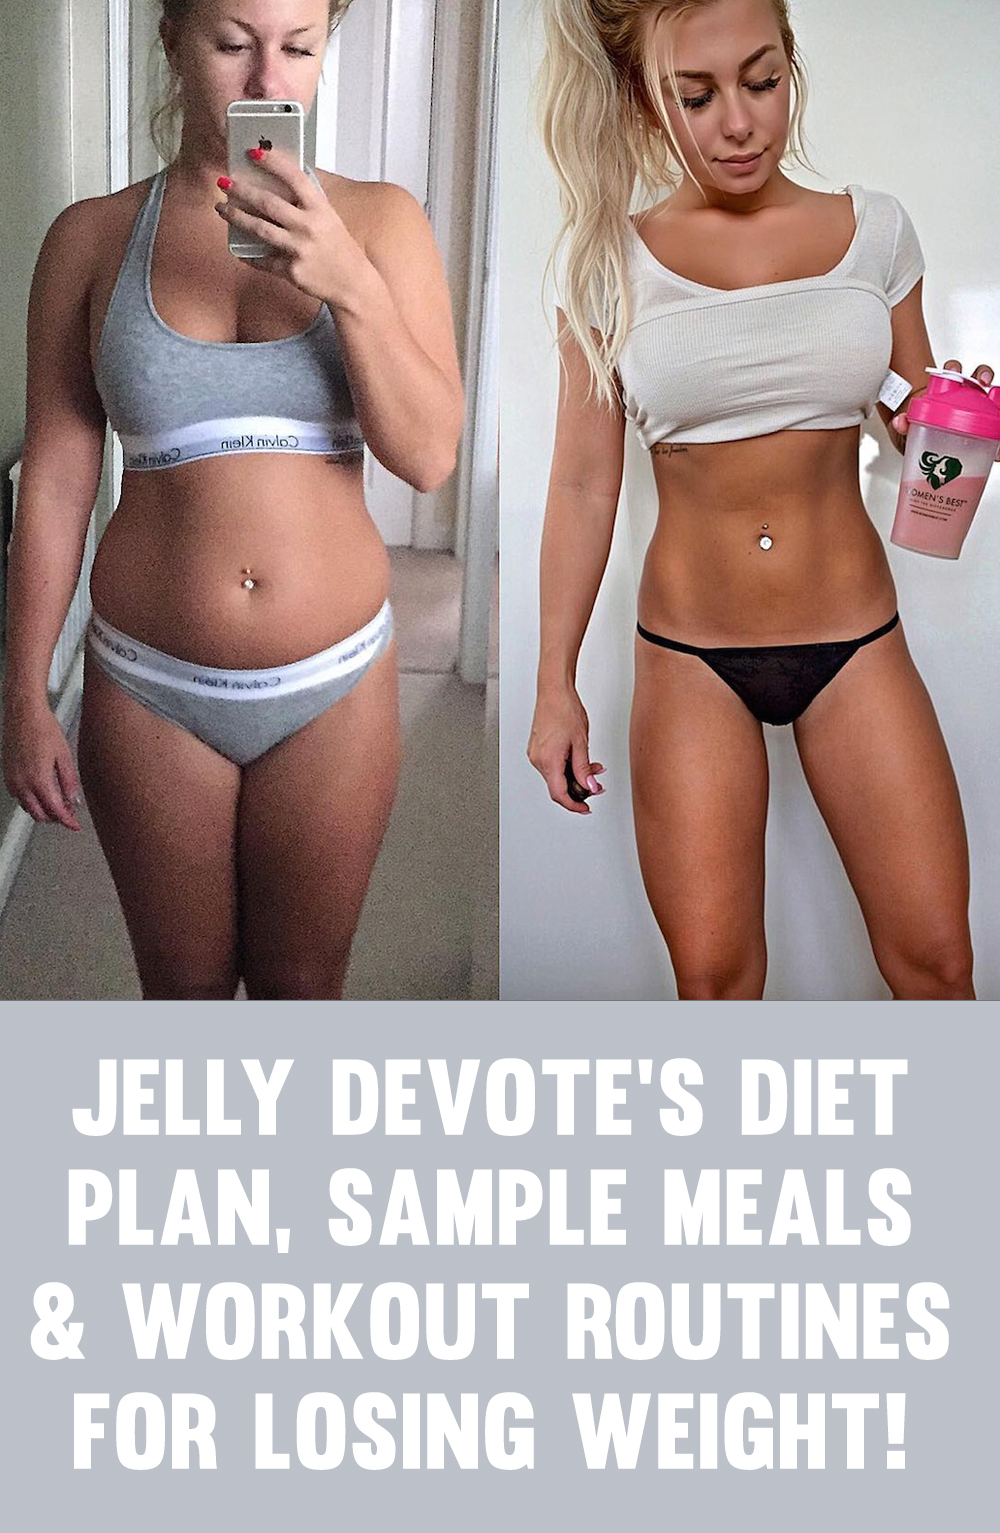 Jelly Devote Diet Plan, Sample Meals & Workout Routines For Getting In Shape!